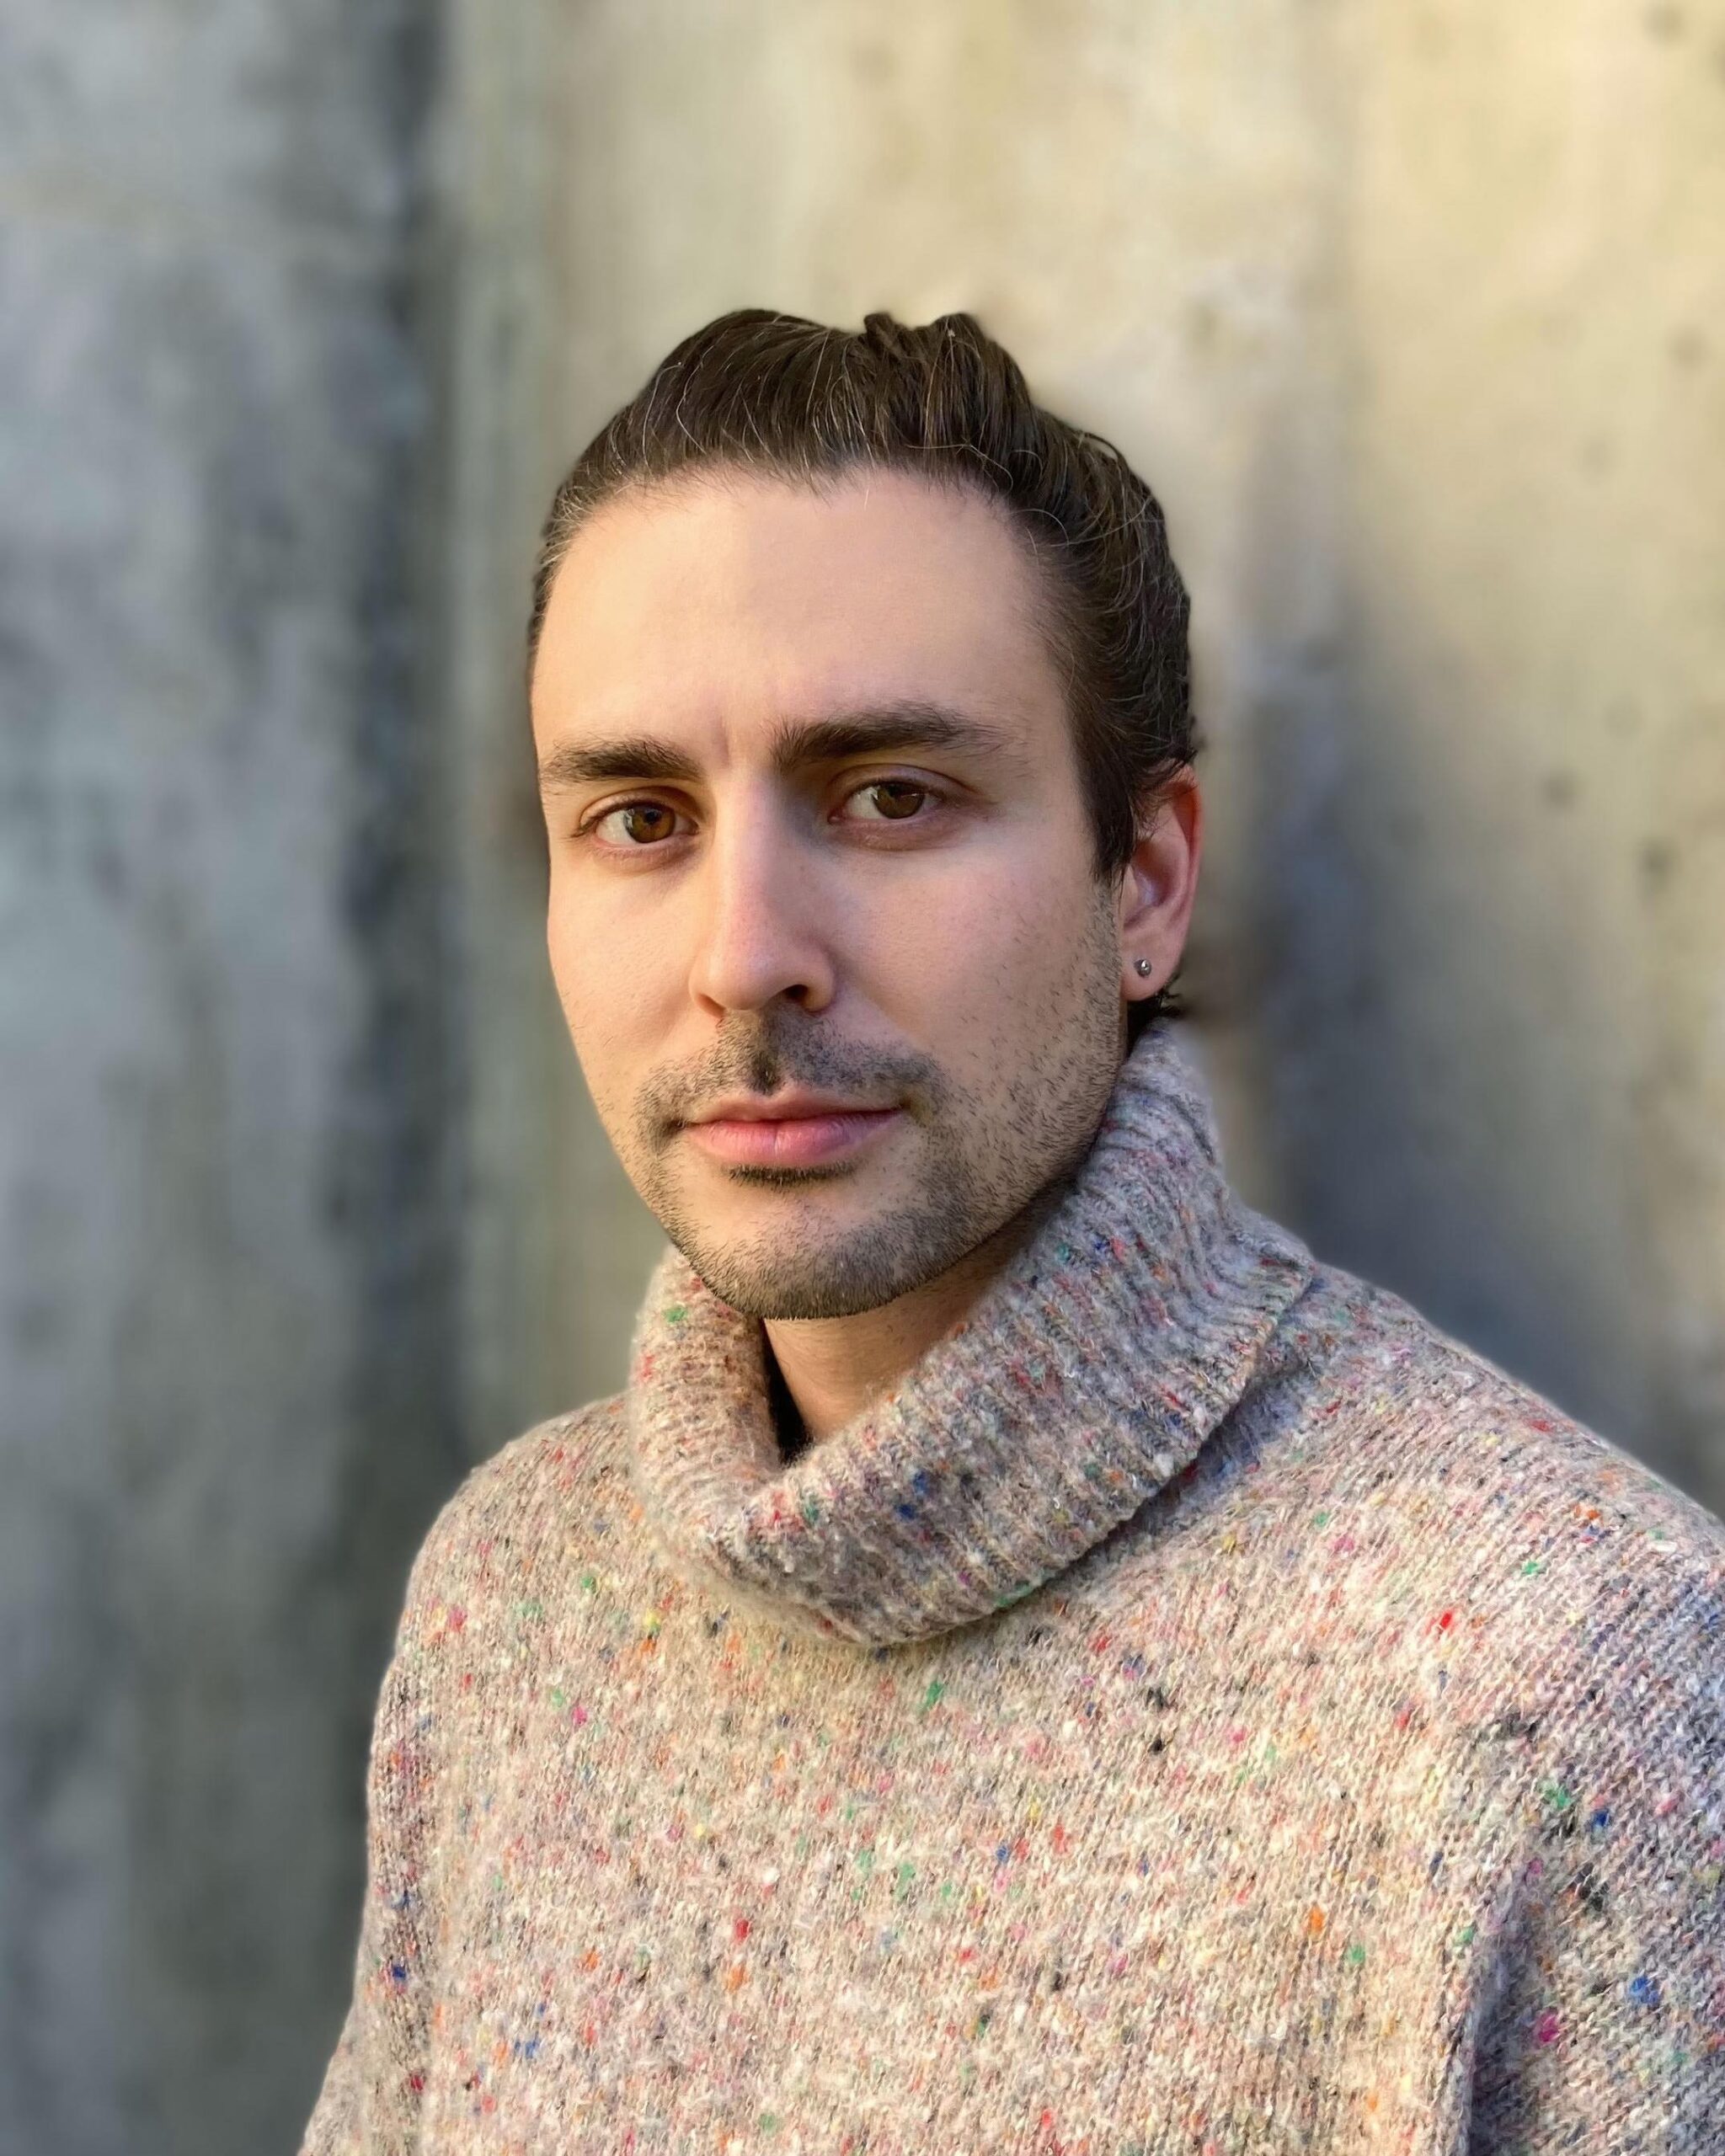 Peter Vale in flecked turtleneck sweater in front of a concrete wall